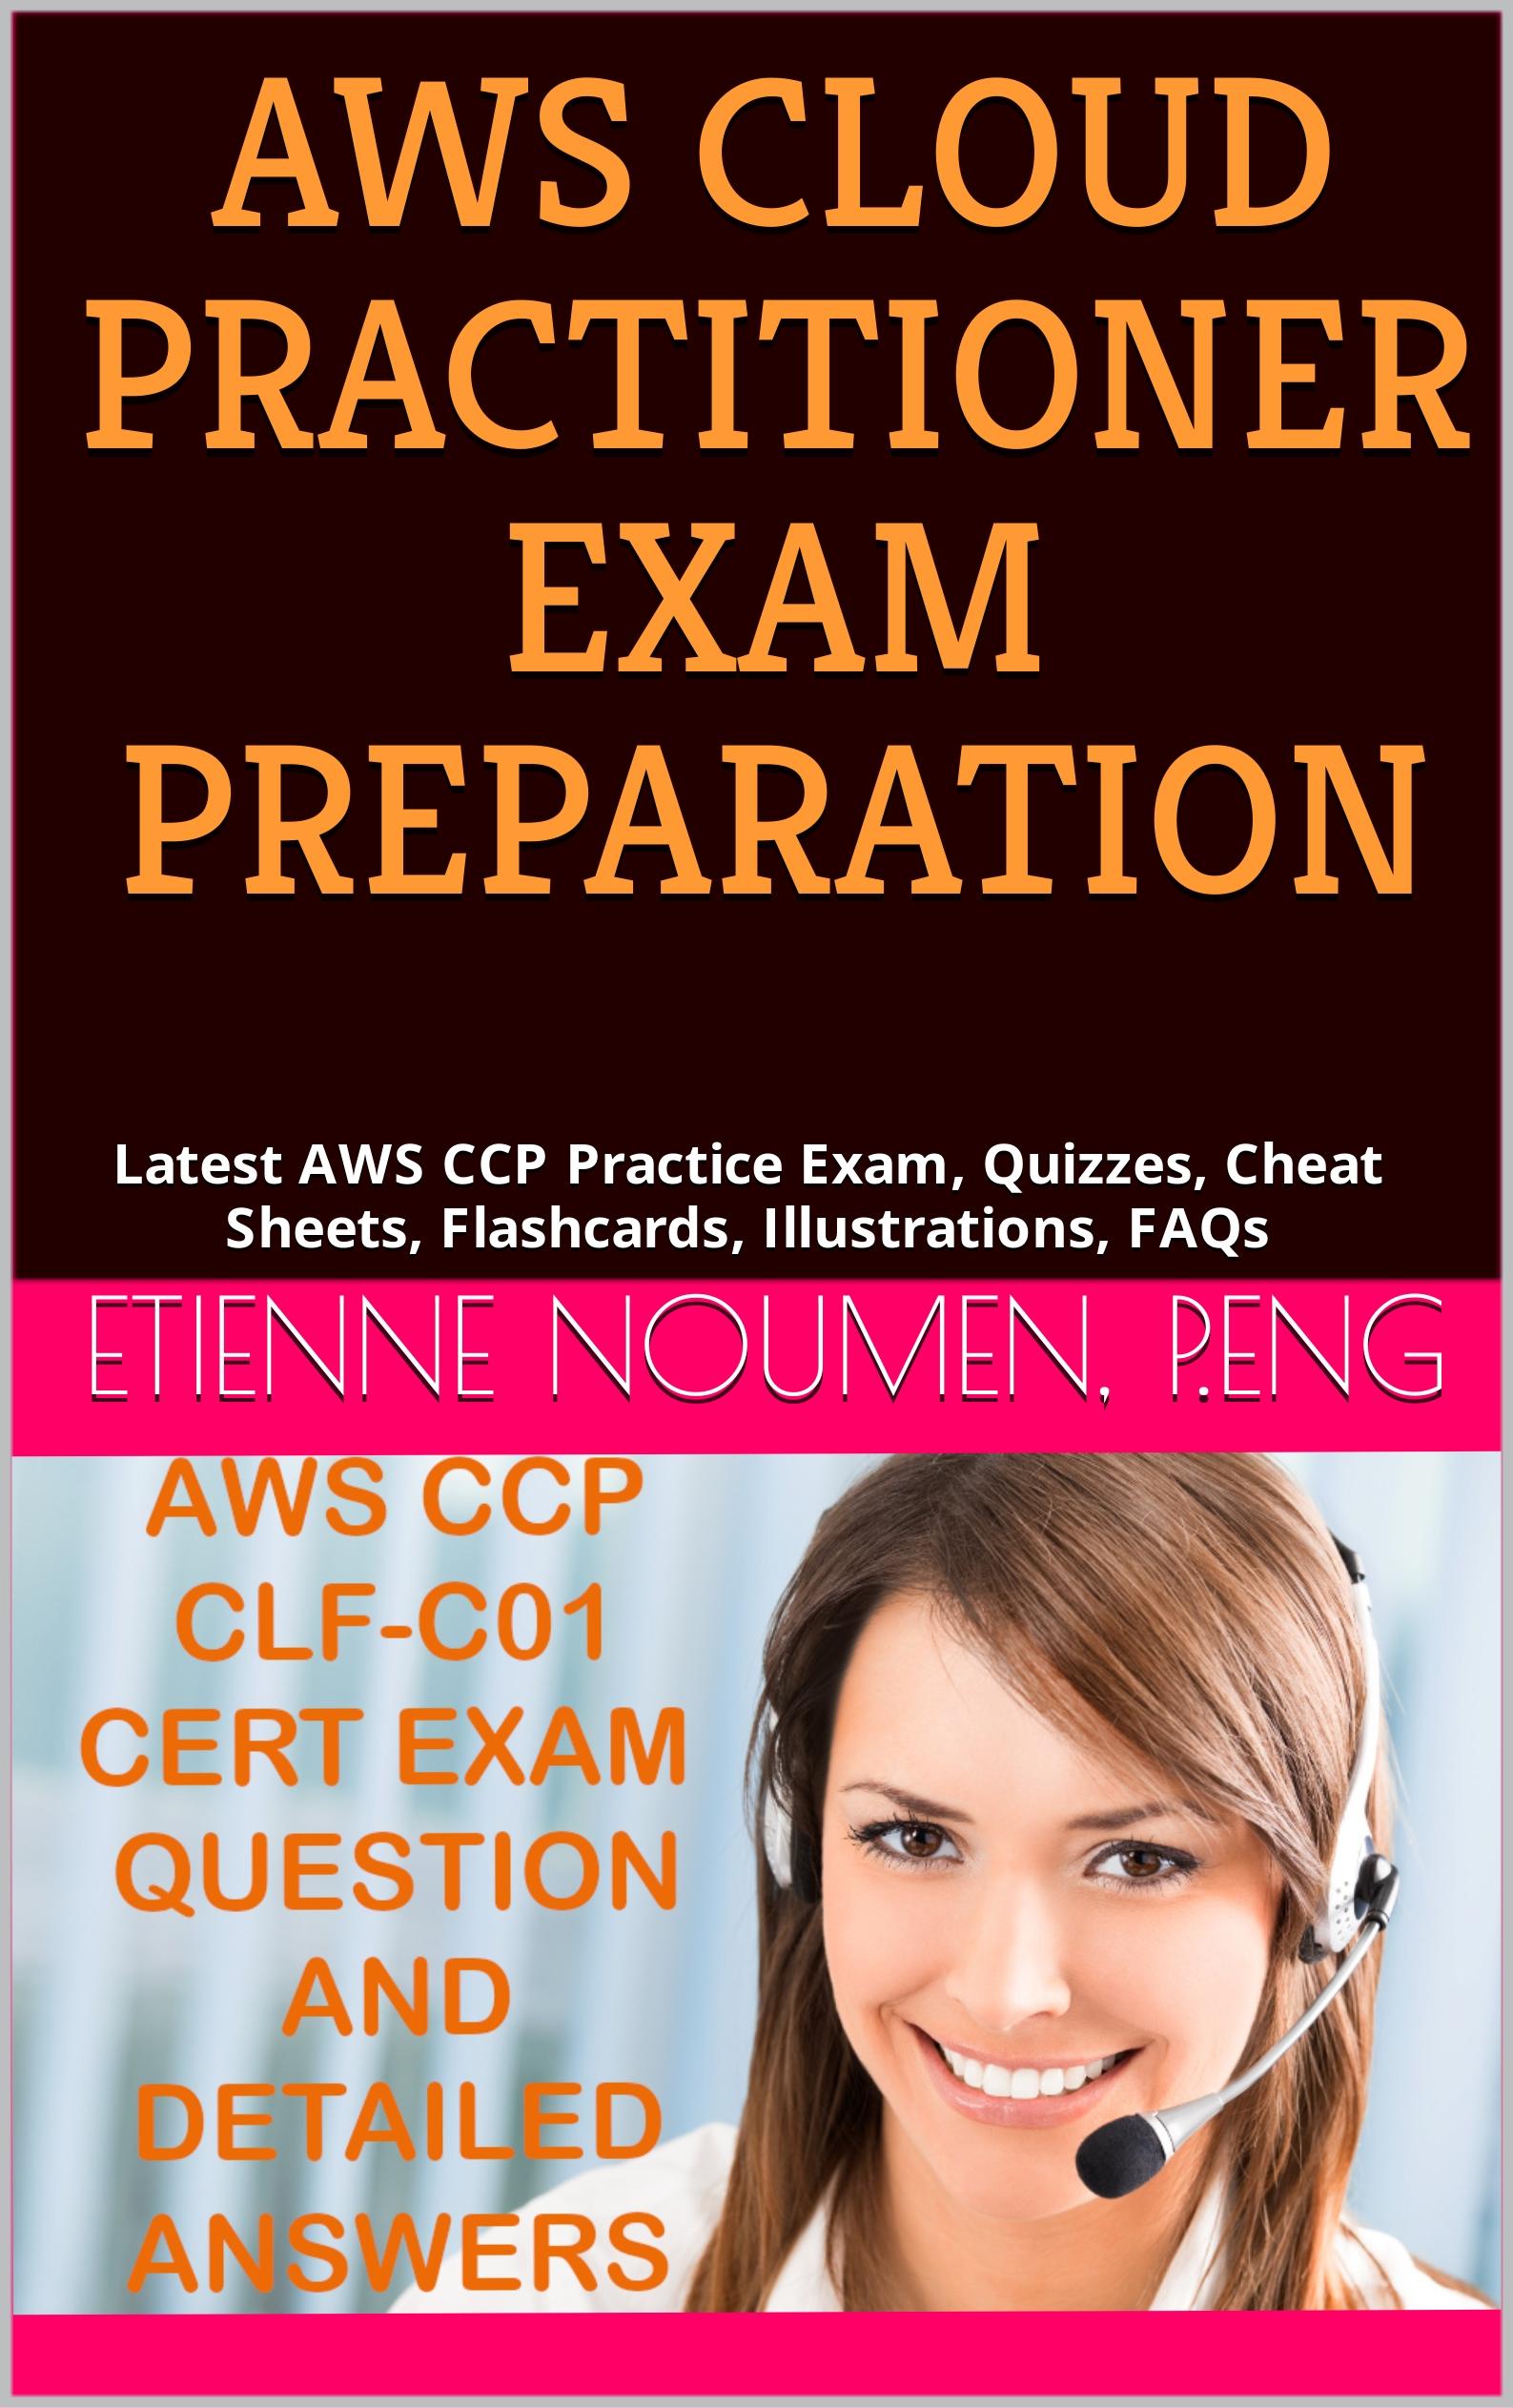 AWS Cloud Practitioner Certification Practice Exam – 300 Quizzes - Flashcards : Prepare and Pass the AWS CCP CLF-C01 with Mock Exam, Quizzes, Detailed